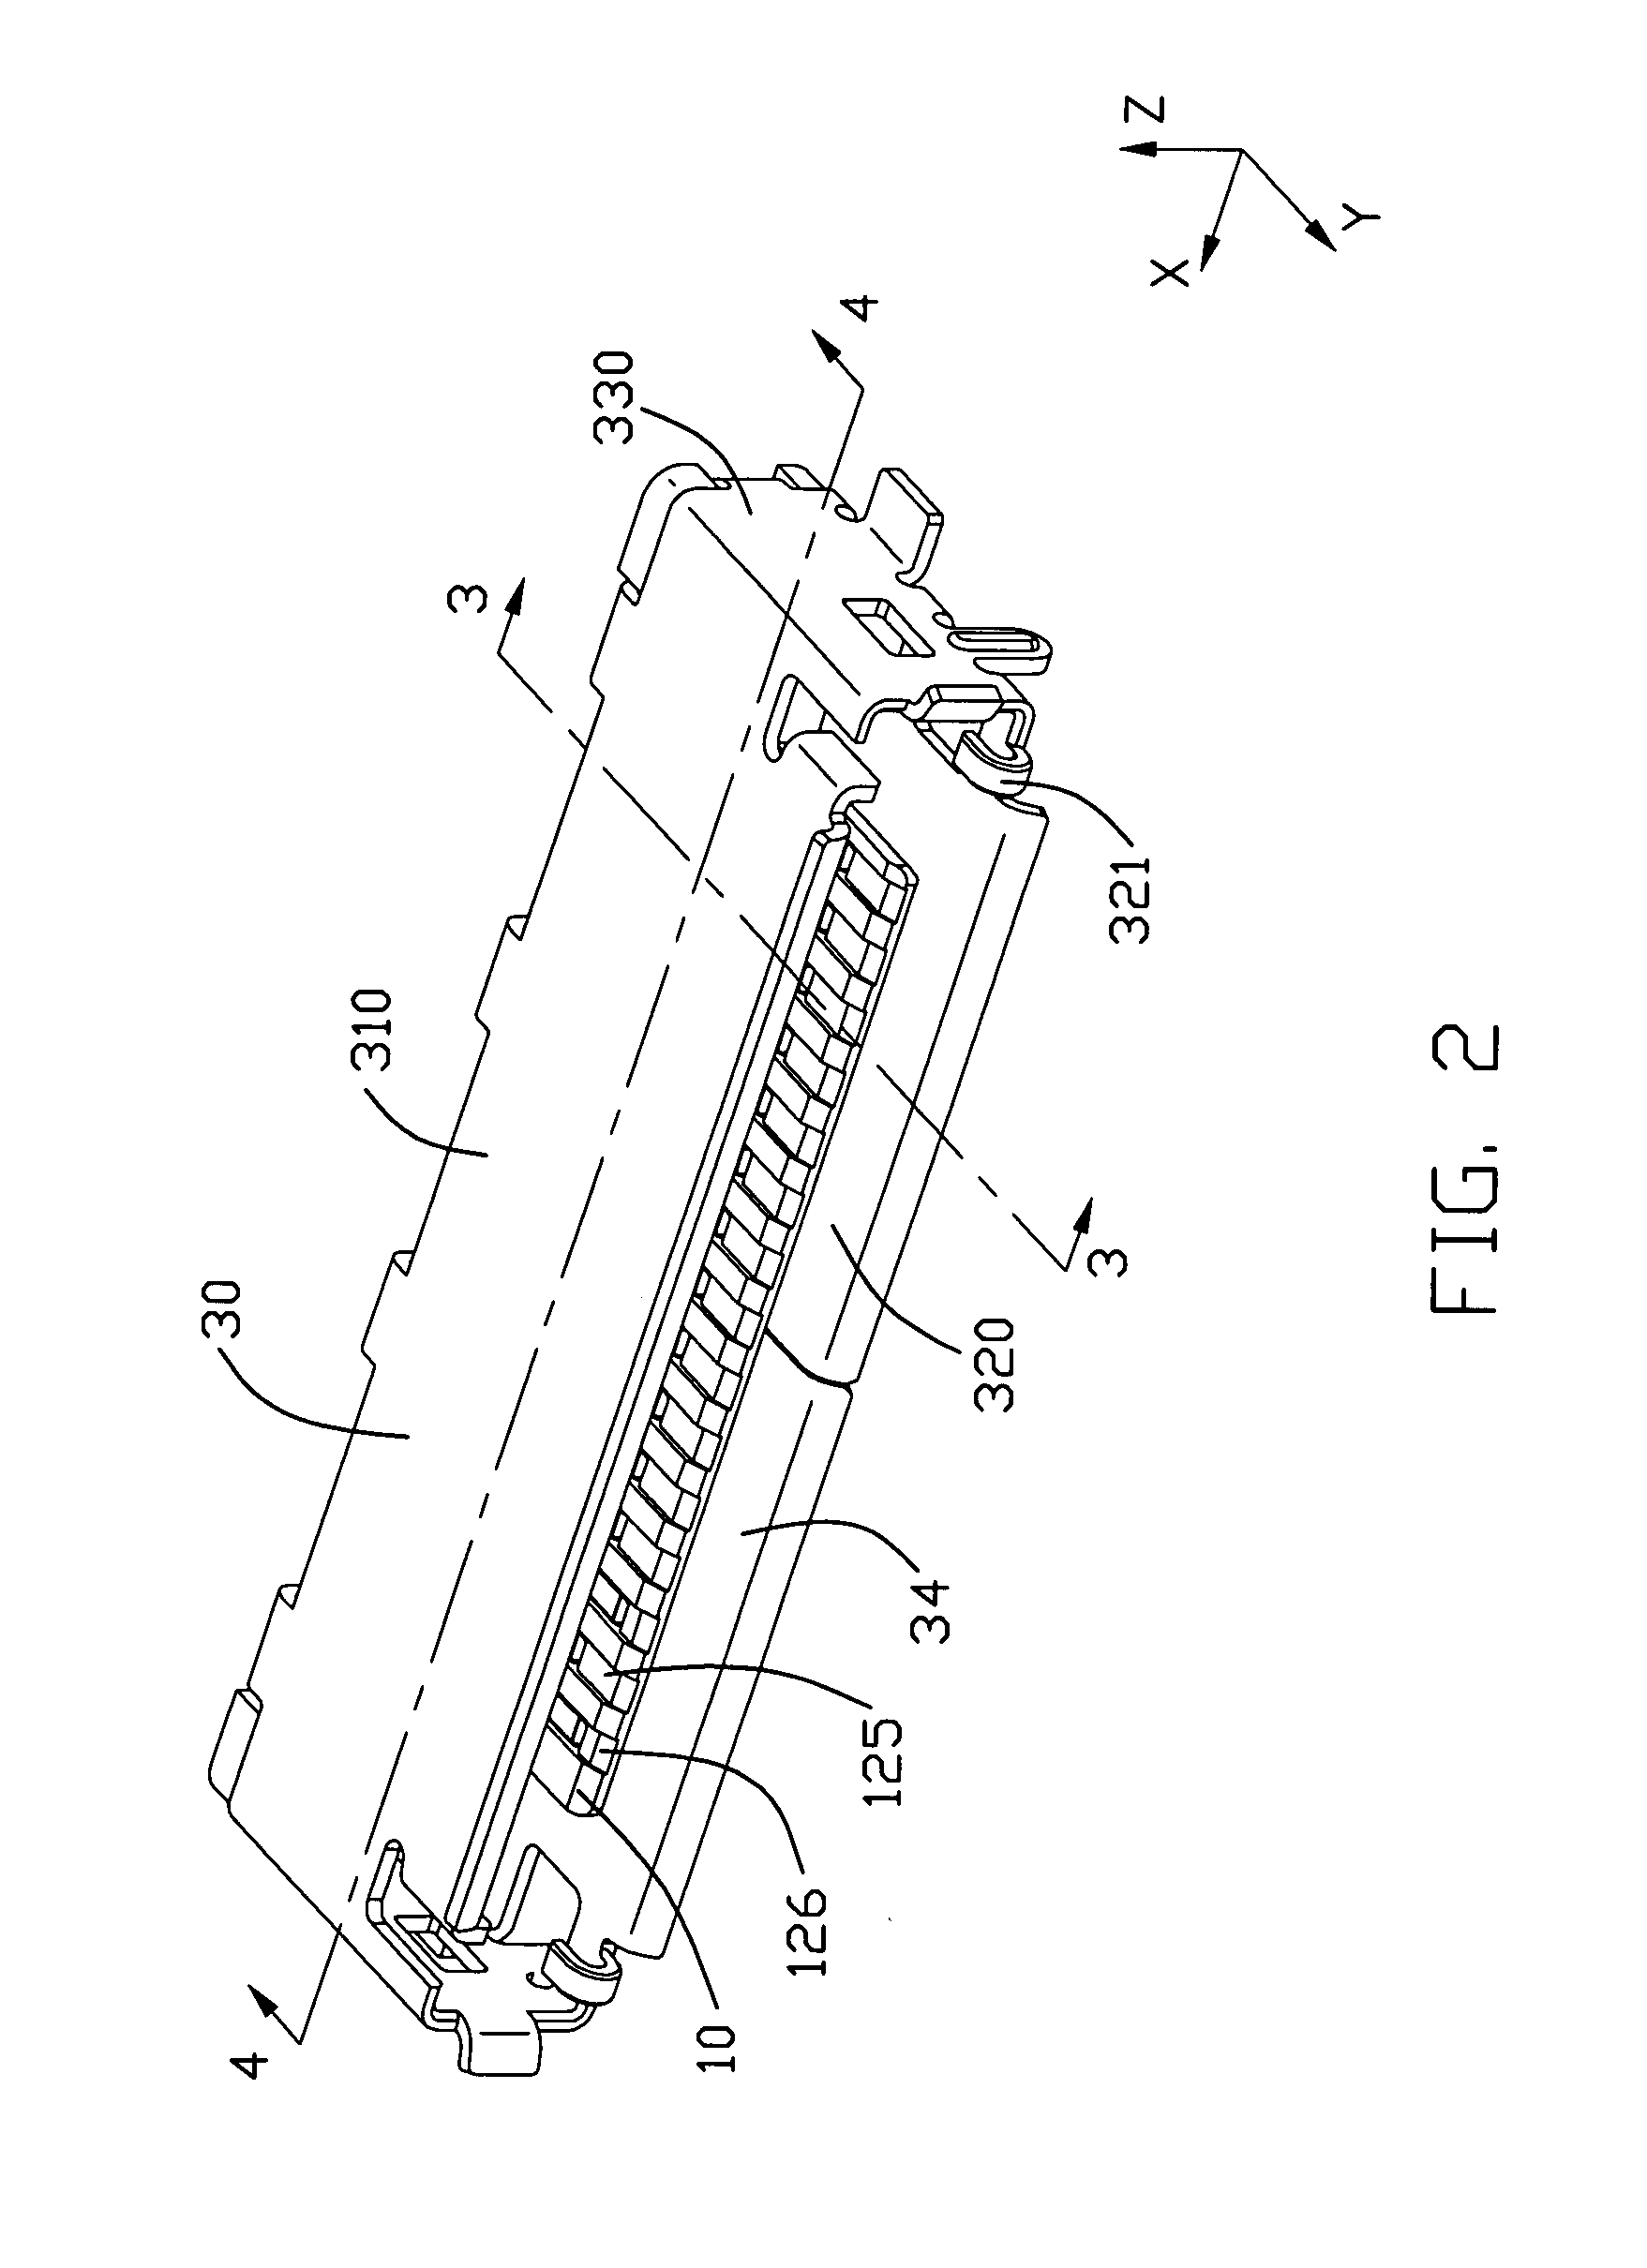 Electrical connector with improved contact